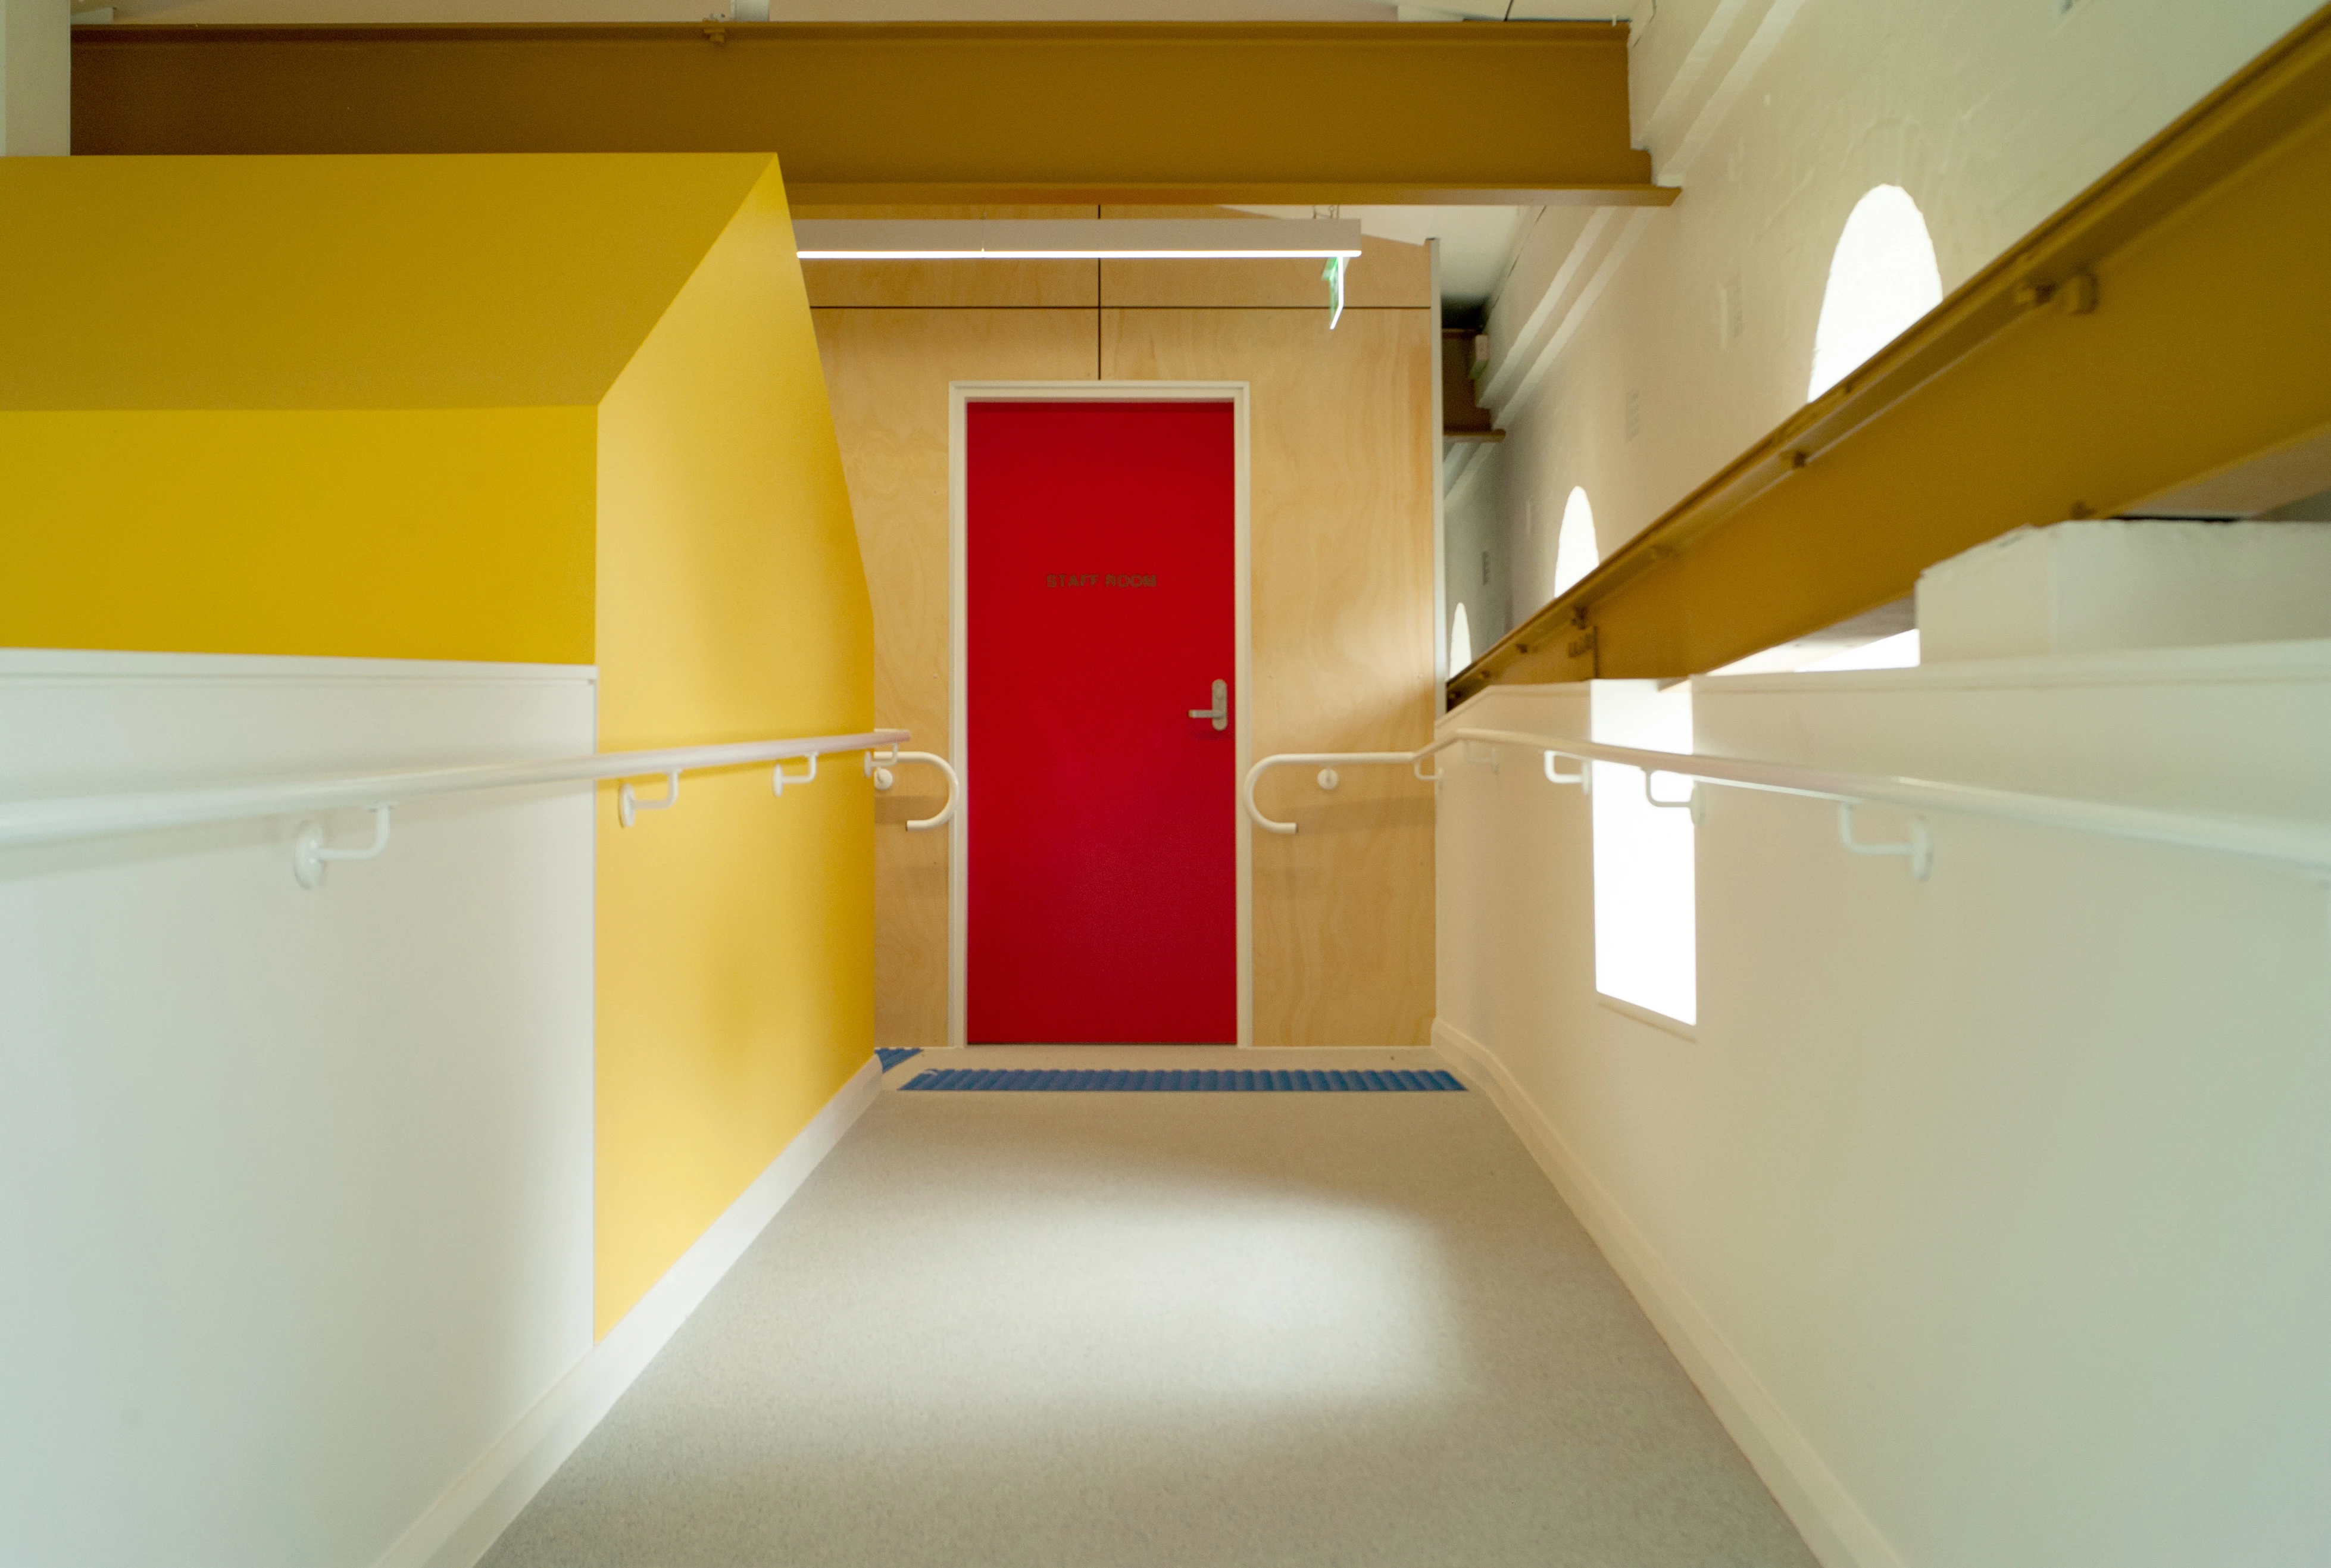 Yellow and white ramp hallway with red door at end.